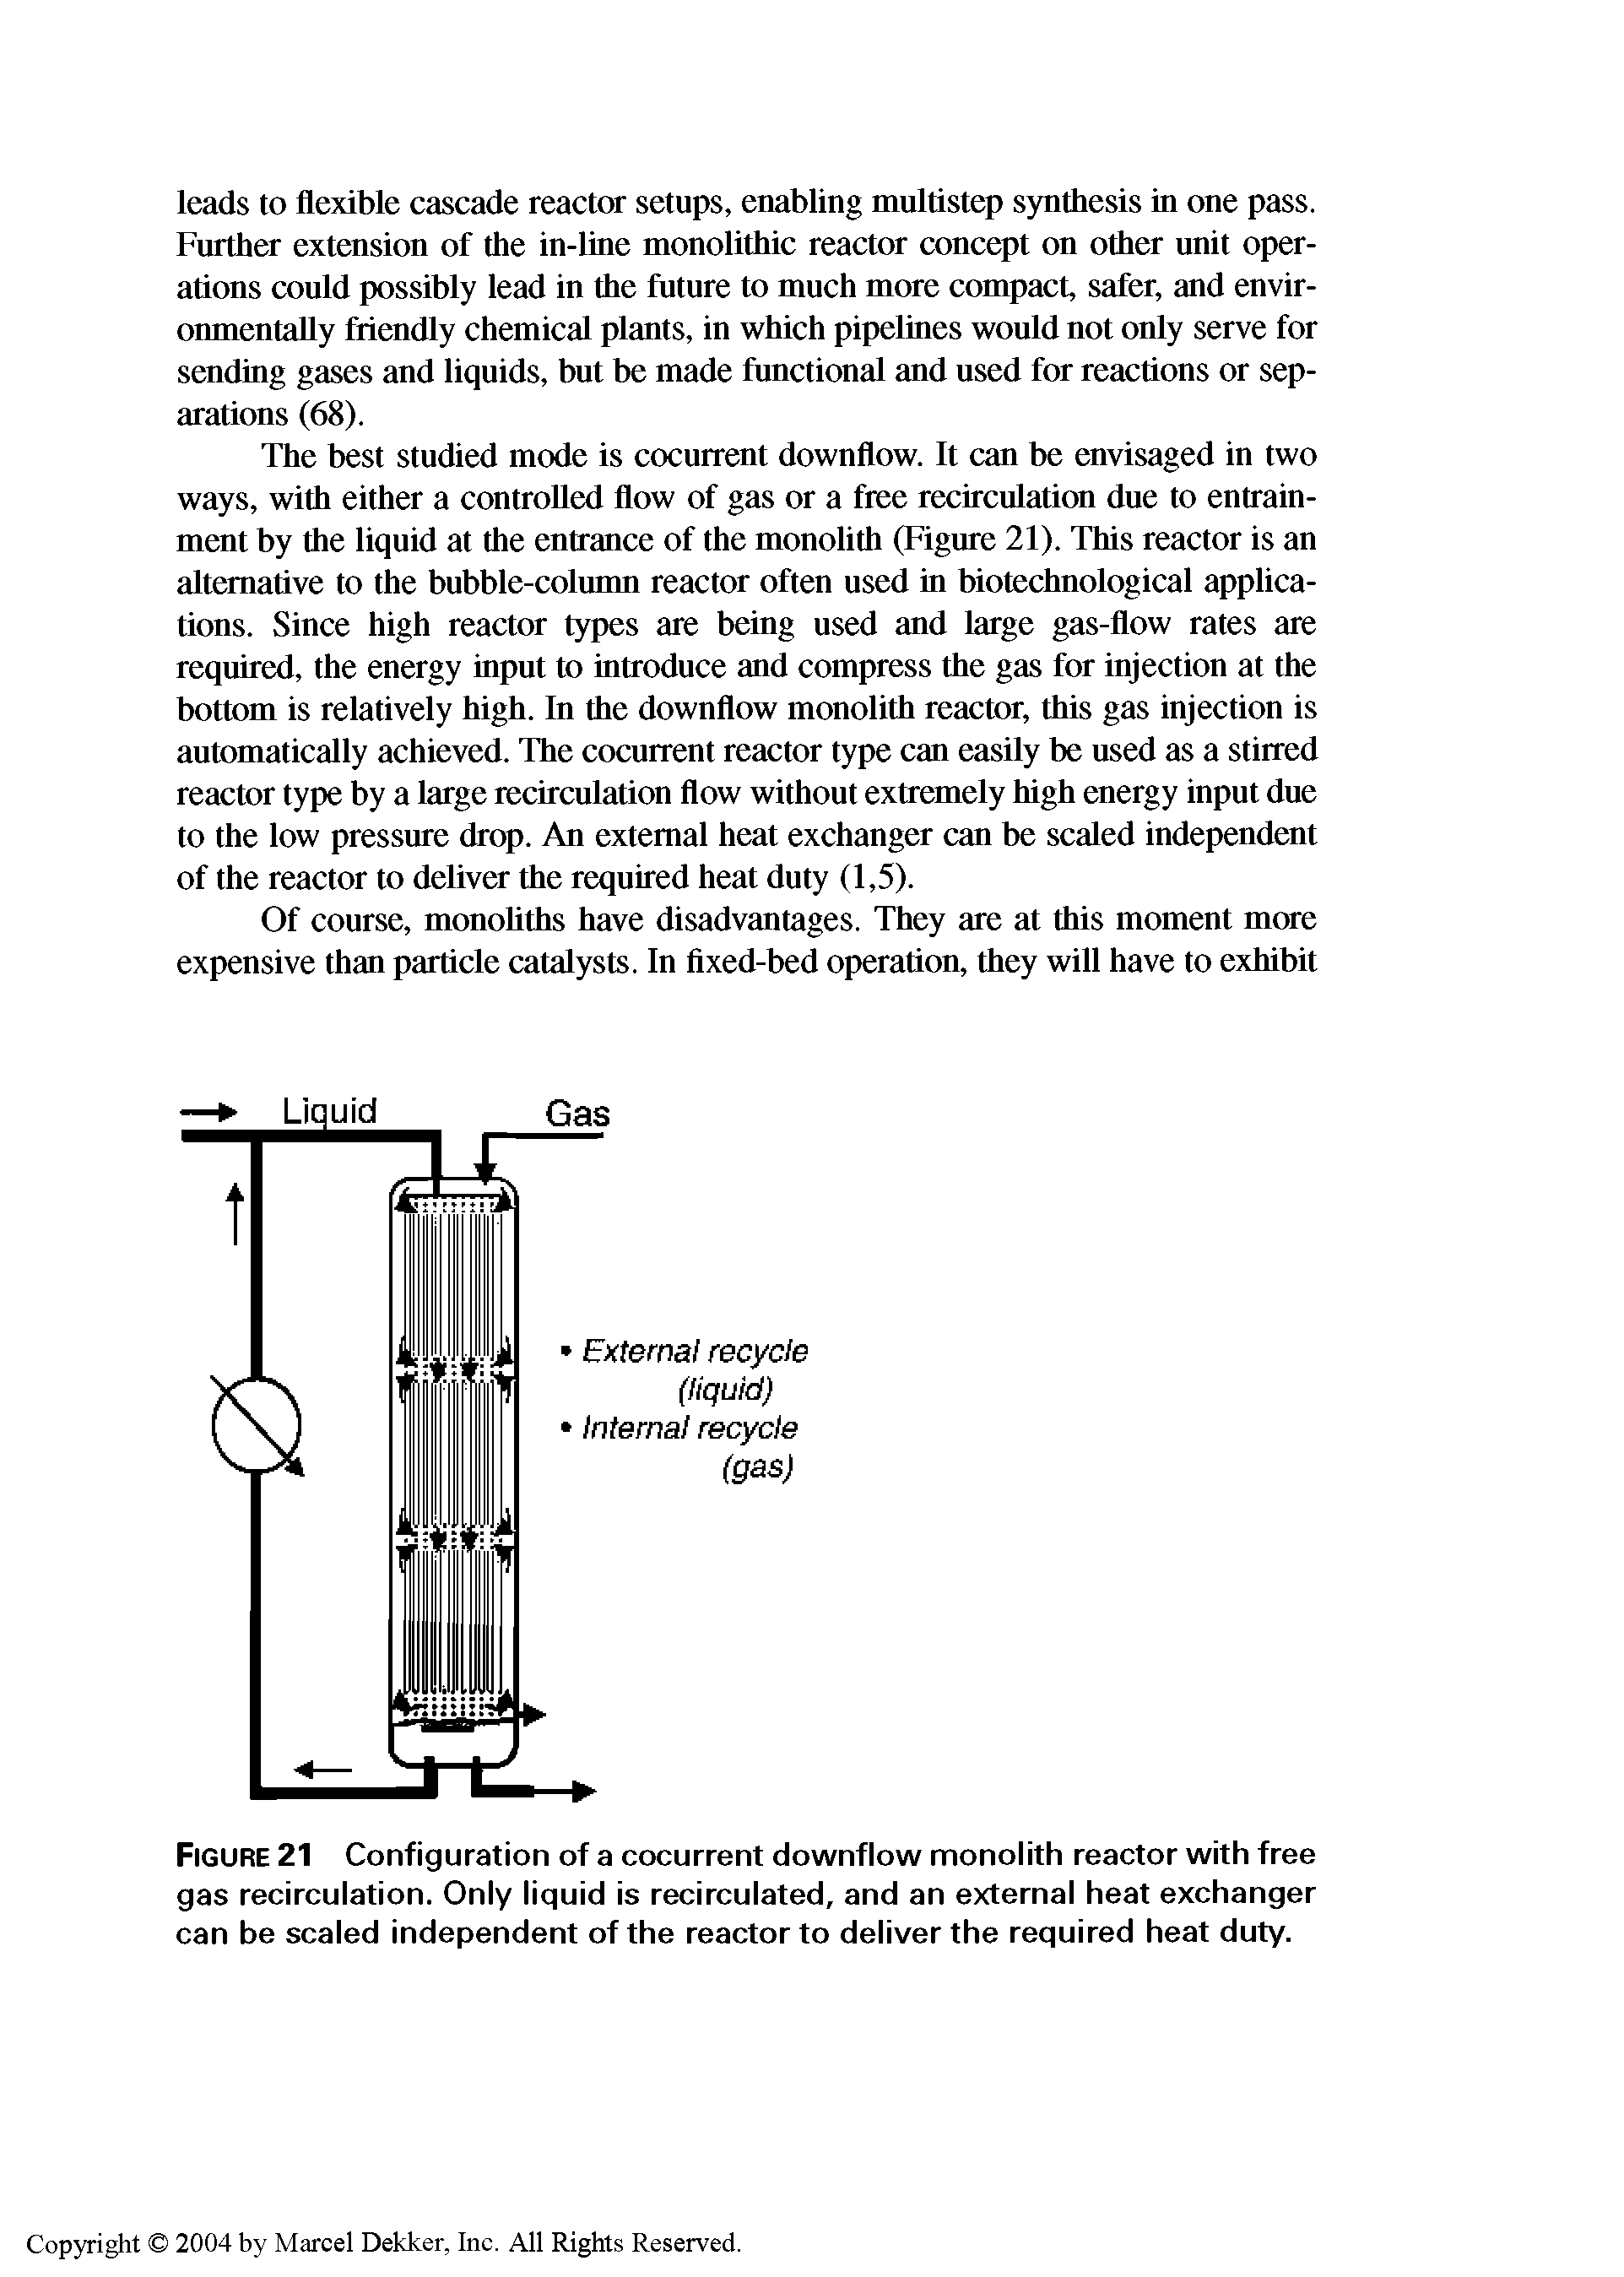 Figure 21 Configuration of a cocurrent downflow monolith reactor with free gas recirculation. Only liquid is recirculated, and an external heat exchanger can be scaled independent of the reactor to deliver the required heat duty.